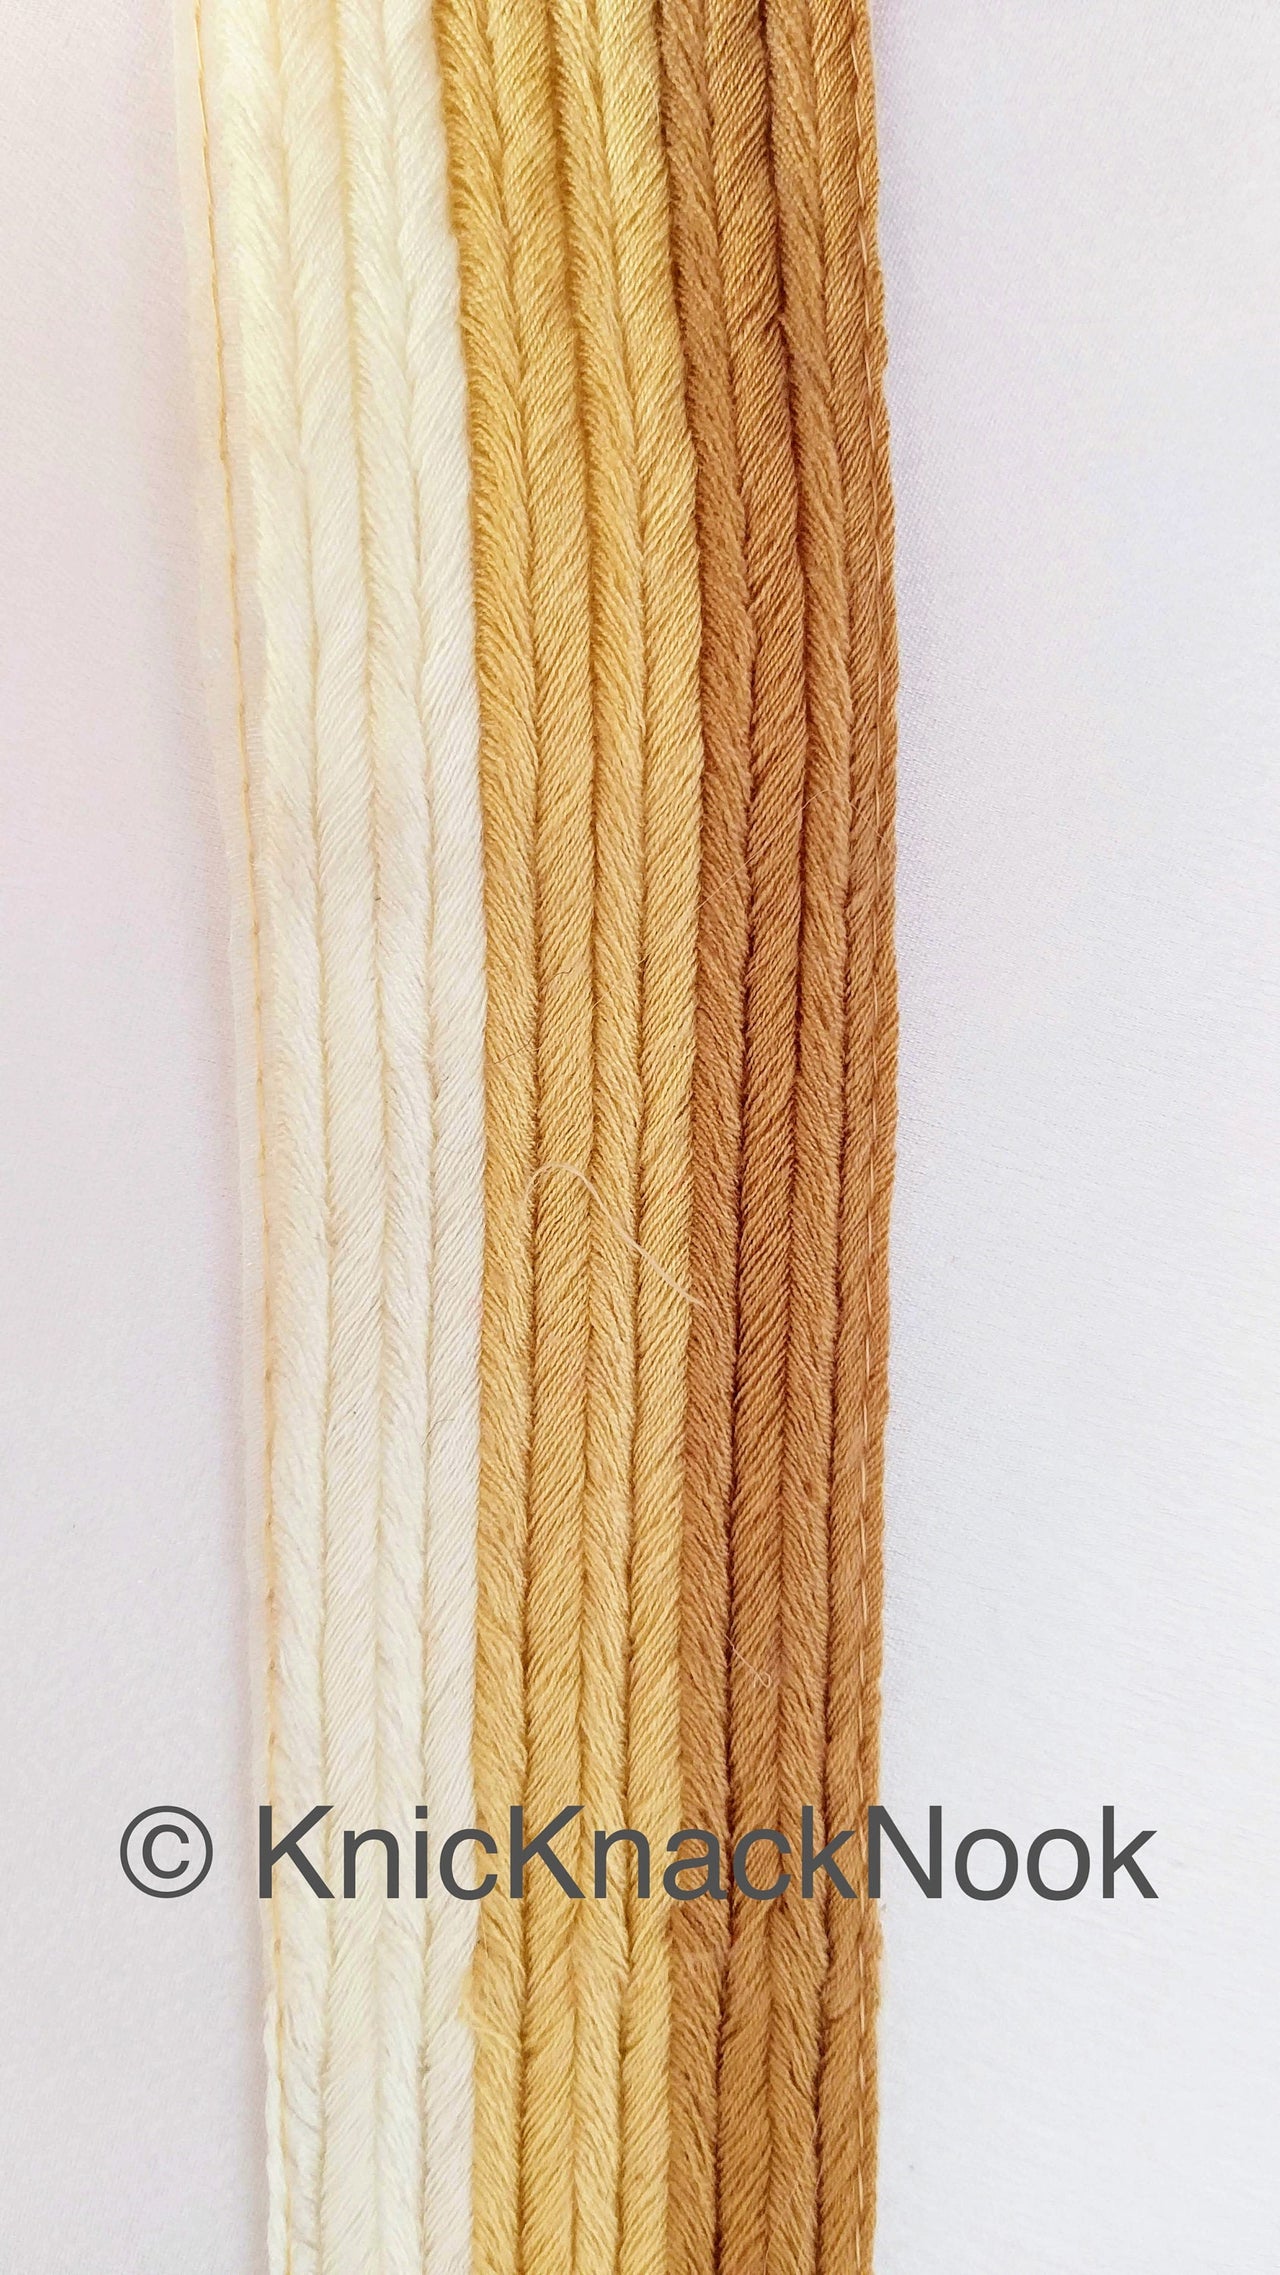 Off White And Brown Thread Stripes Trim, Cotton Embroidered Trim, One Yard Lace Trim